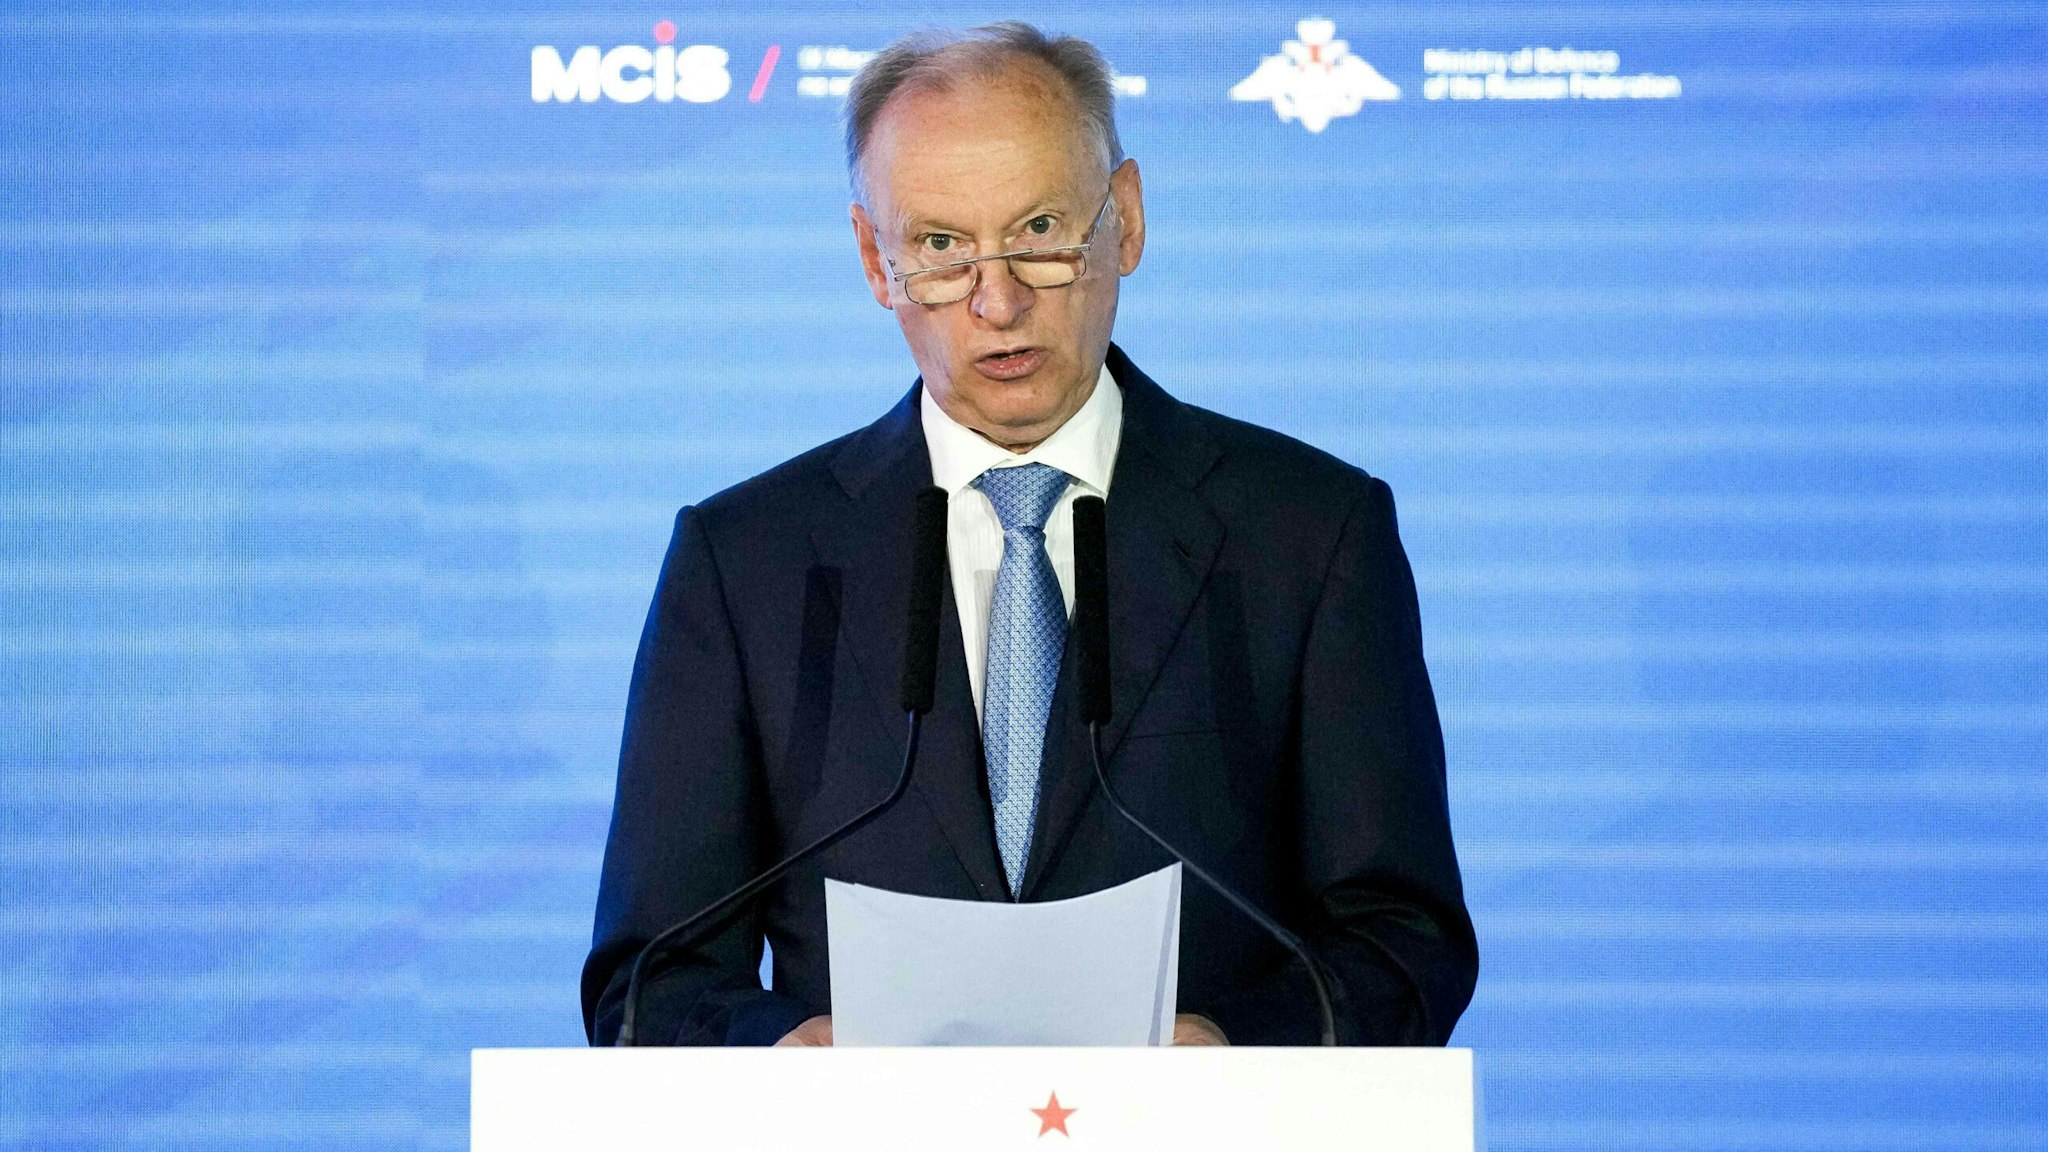 Russia's security council secretary Nikolai Patrushev delivers a speech at the IX Moscow conference on international security in Moscow on June 24, 2021.